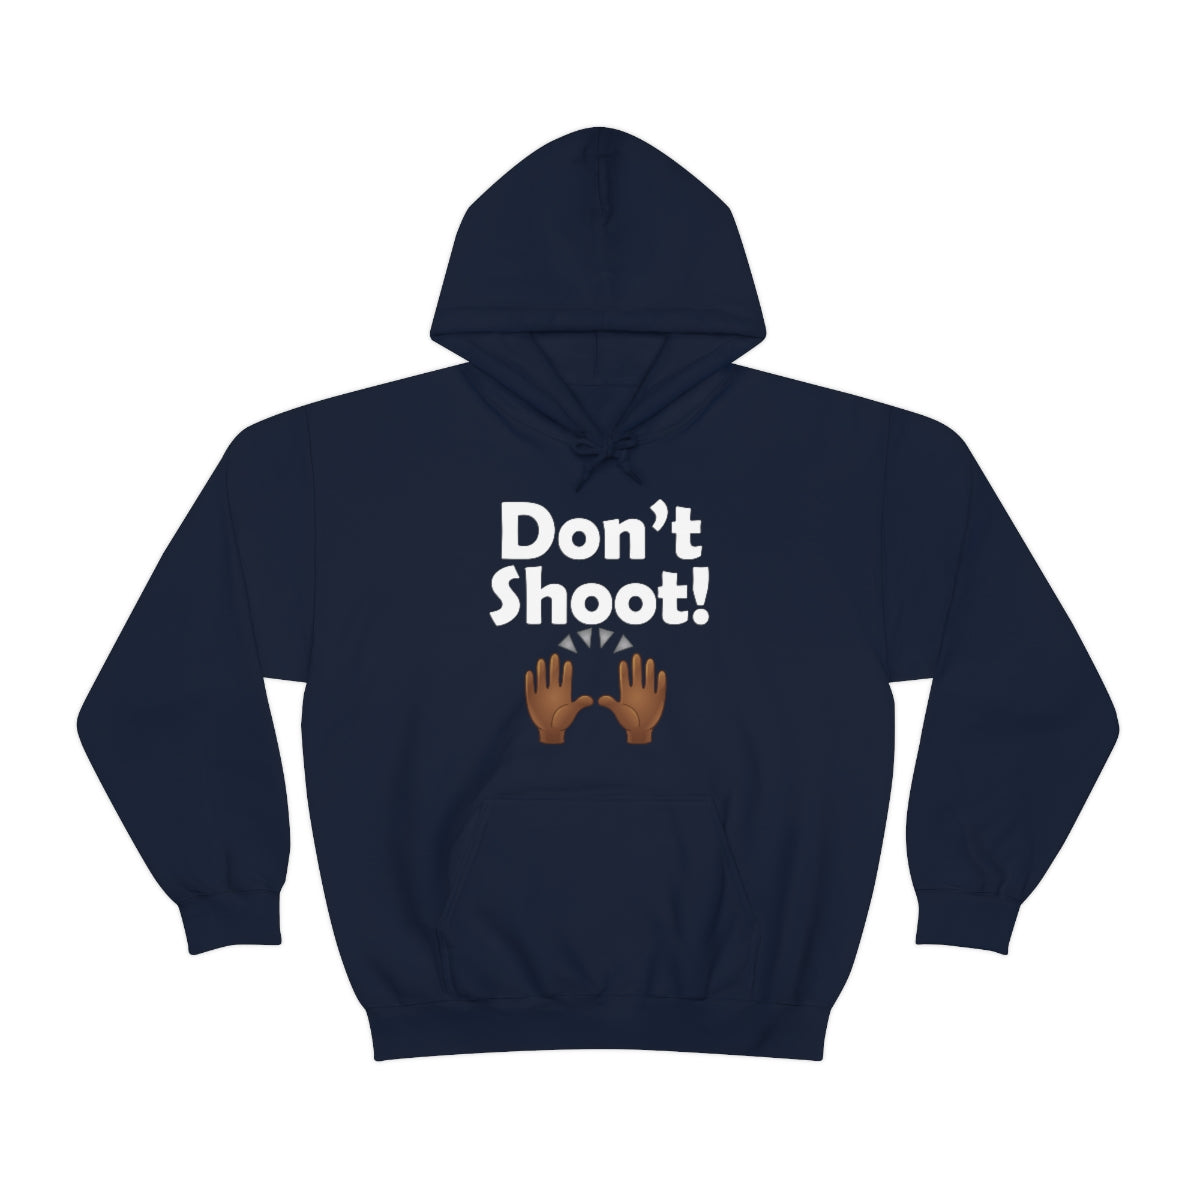 "Don't Shoot" Unisex Hoodie (Available in Black, Charcoal, & Navy Blue)